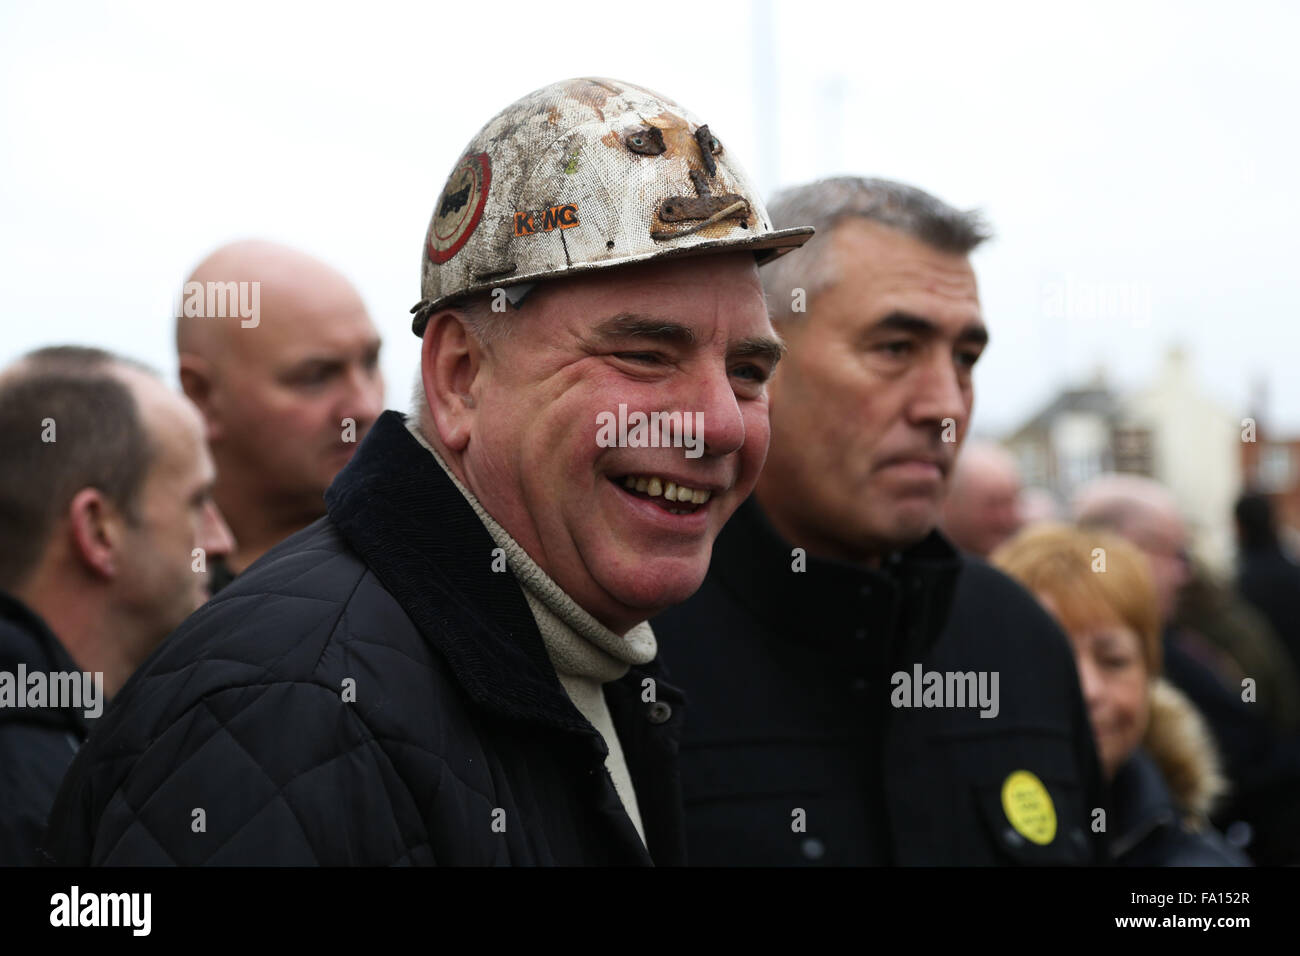 Miners march through Knottingley in West Yorkshire after the closure of the nearby Kellingley Colliery yesterday. Known locally as the Big K, Kellingley was the last remaining deep coal mining operating in the UK. The closure marks the end of what was once a giant industry in Britain. Credit:  Ian Hinchliffe/Alamy Live News Stock Photo